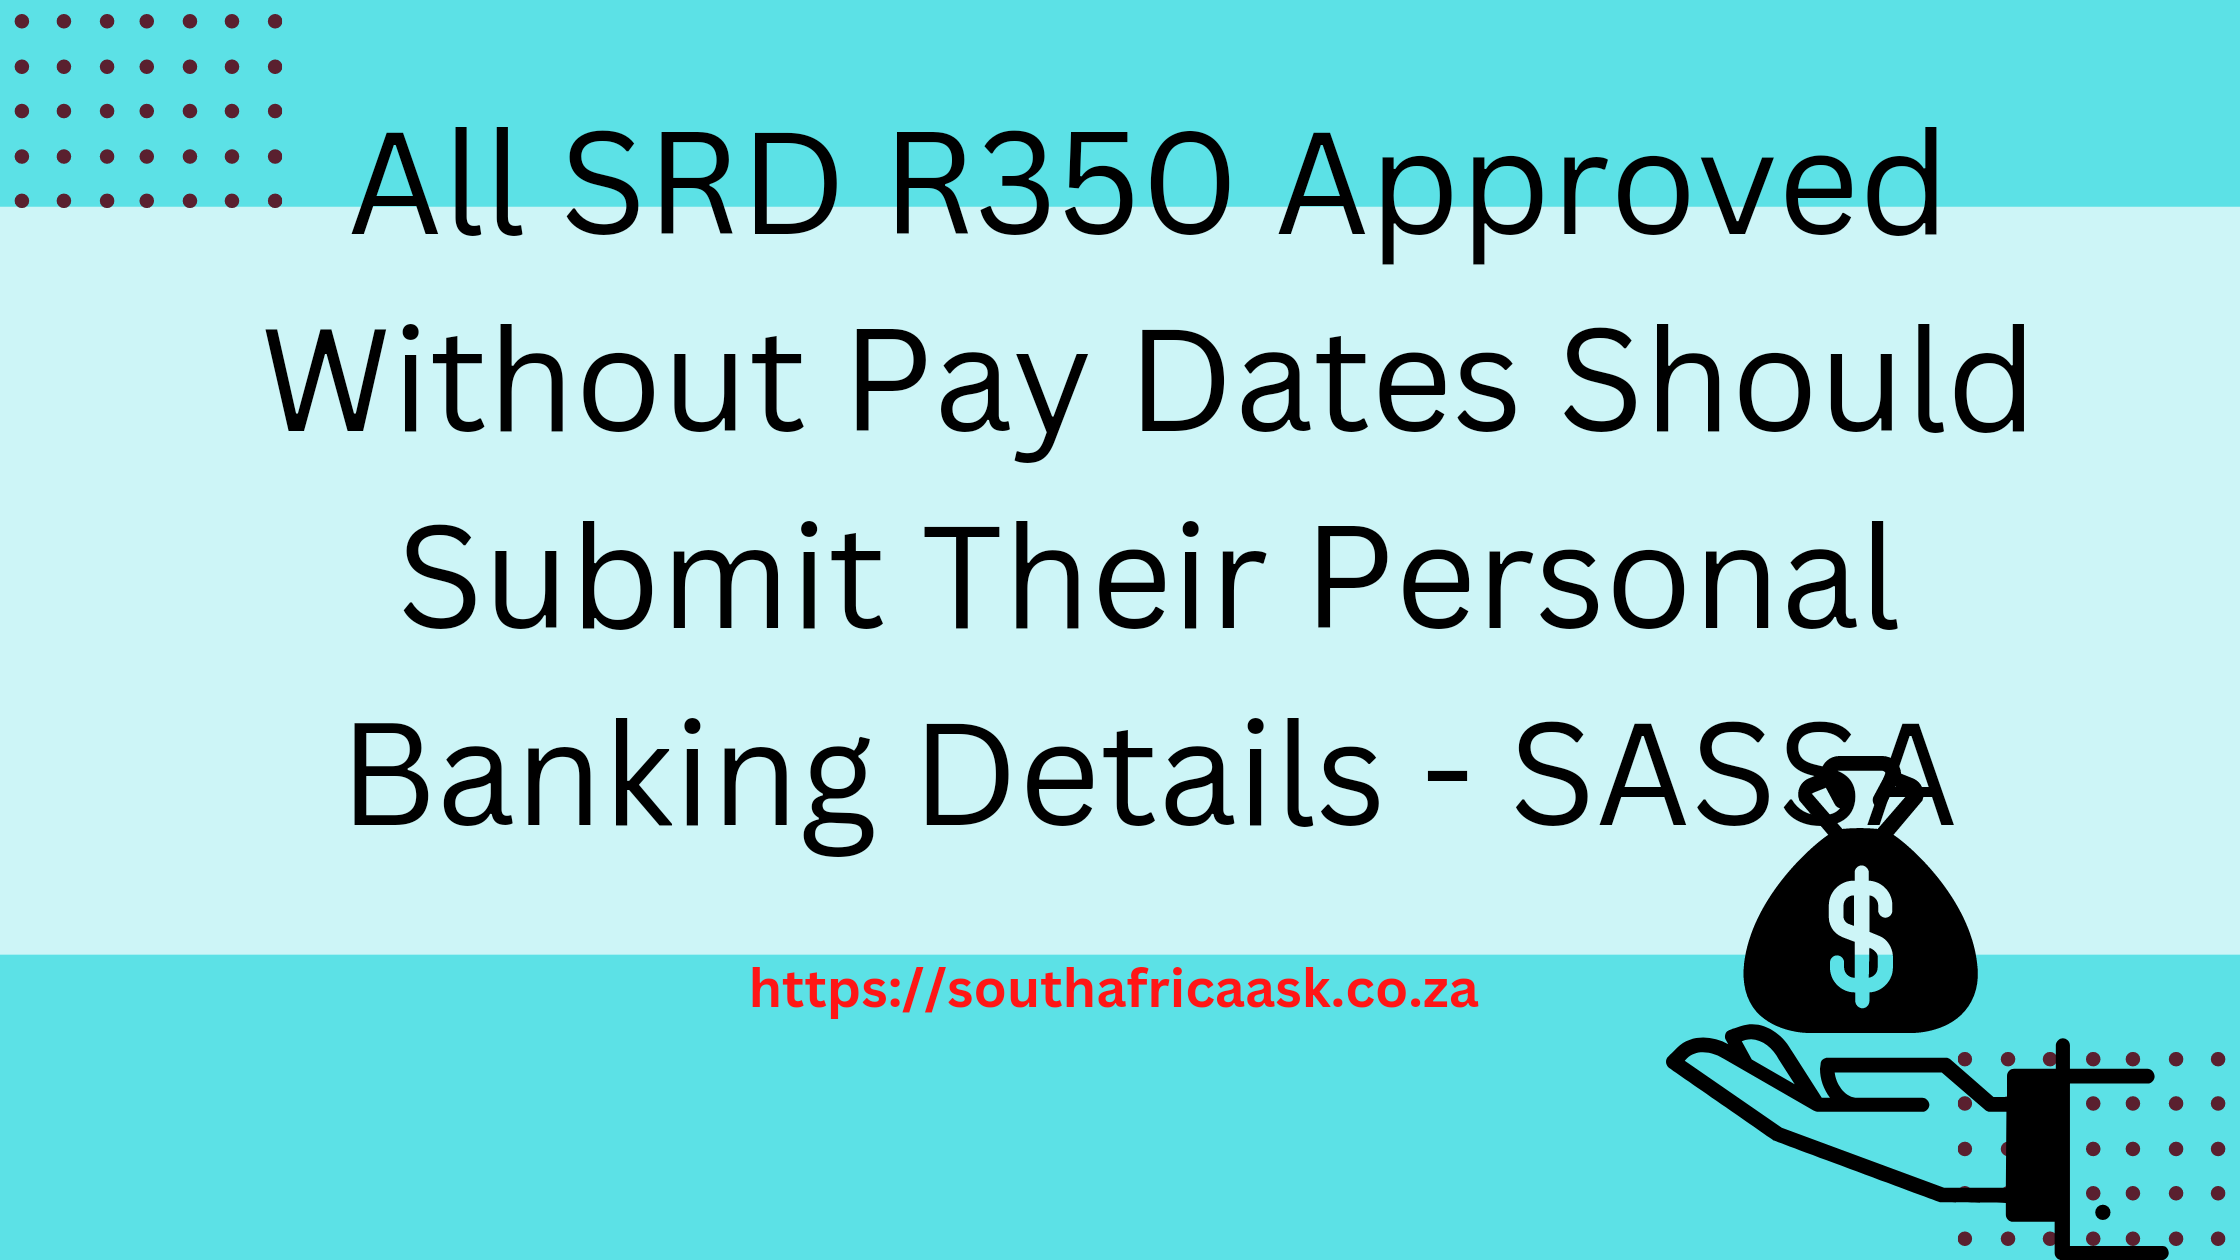 All SRD R350 Approved Without Pay Dates Should Submit Their Personal Banking Details - SASSA